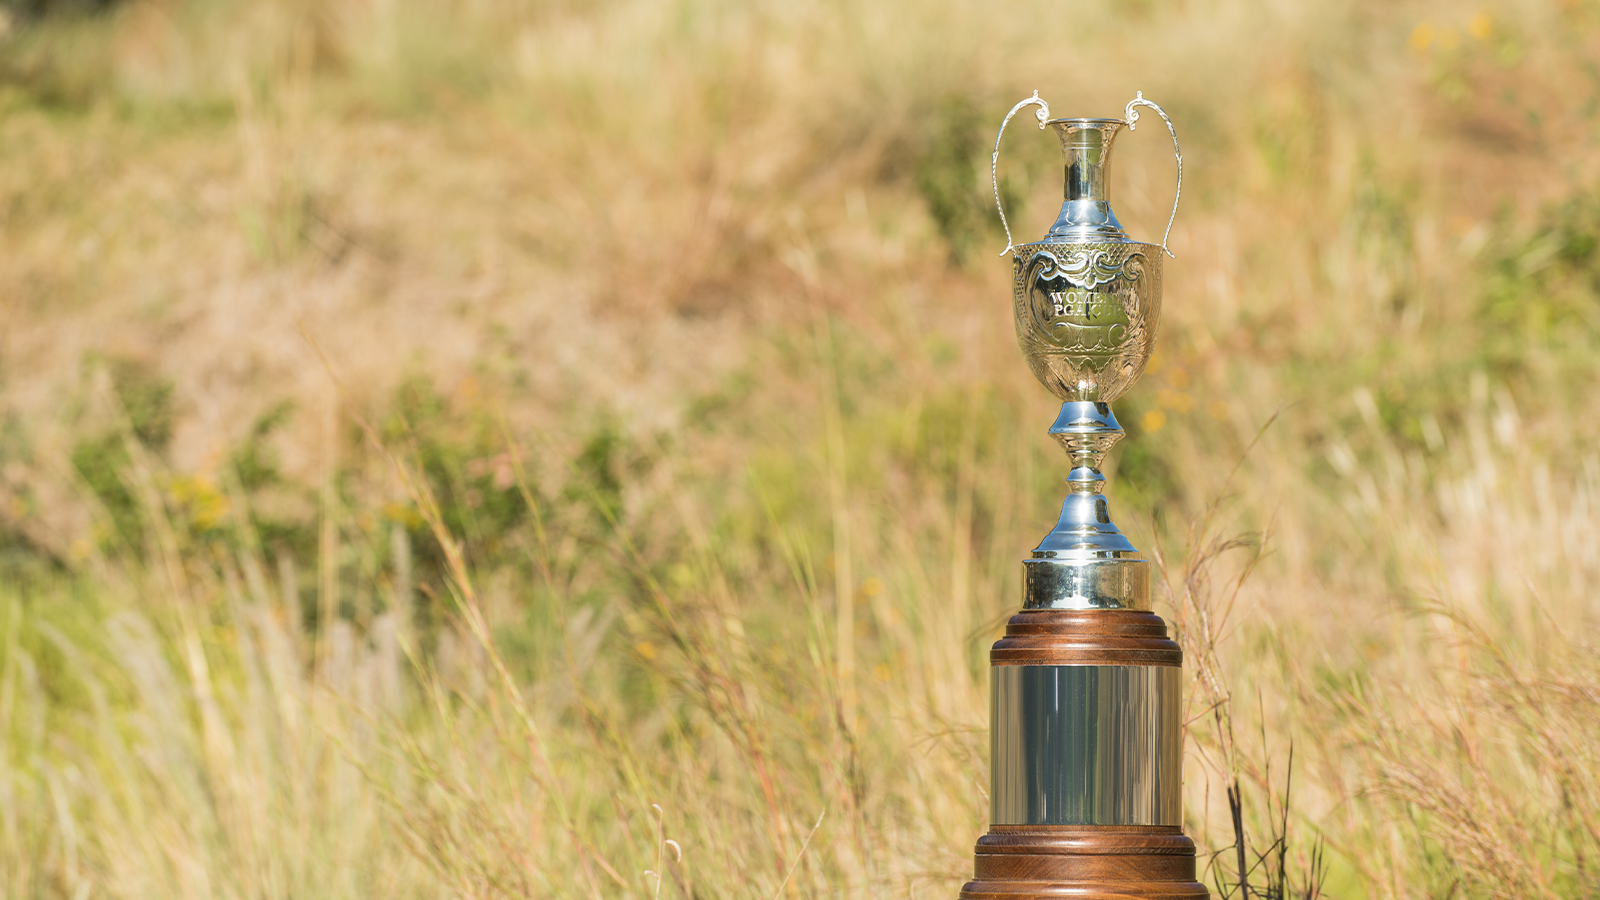 The Women's PGA Cup Trophy during a practice round for the 2019 Women's PGA Cup held at the Omni Barton Creek Resort & Spa on October 23, 2019 in Austin, Texas. (Photo by Montana Pritchard/PGA of America)